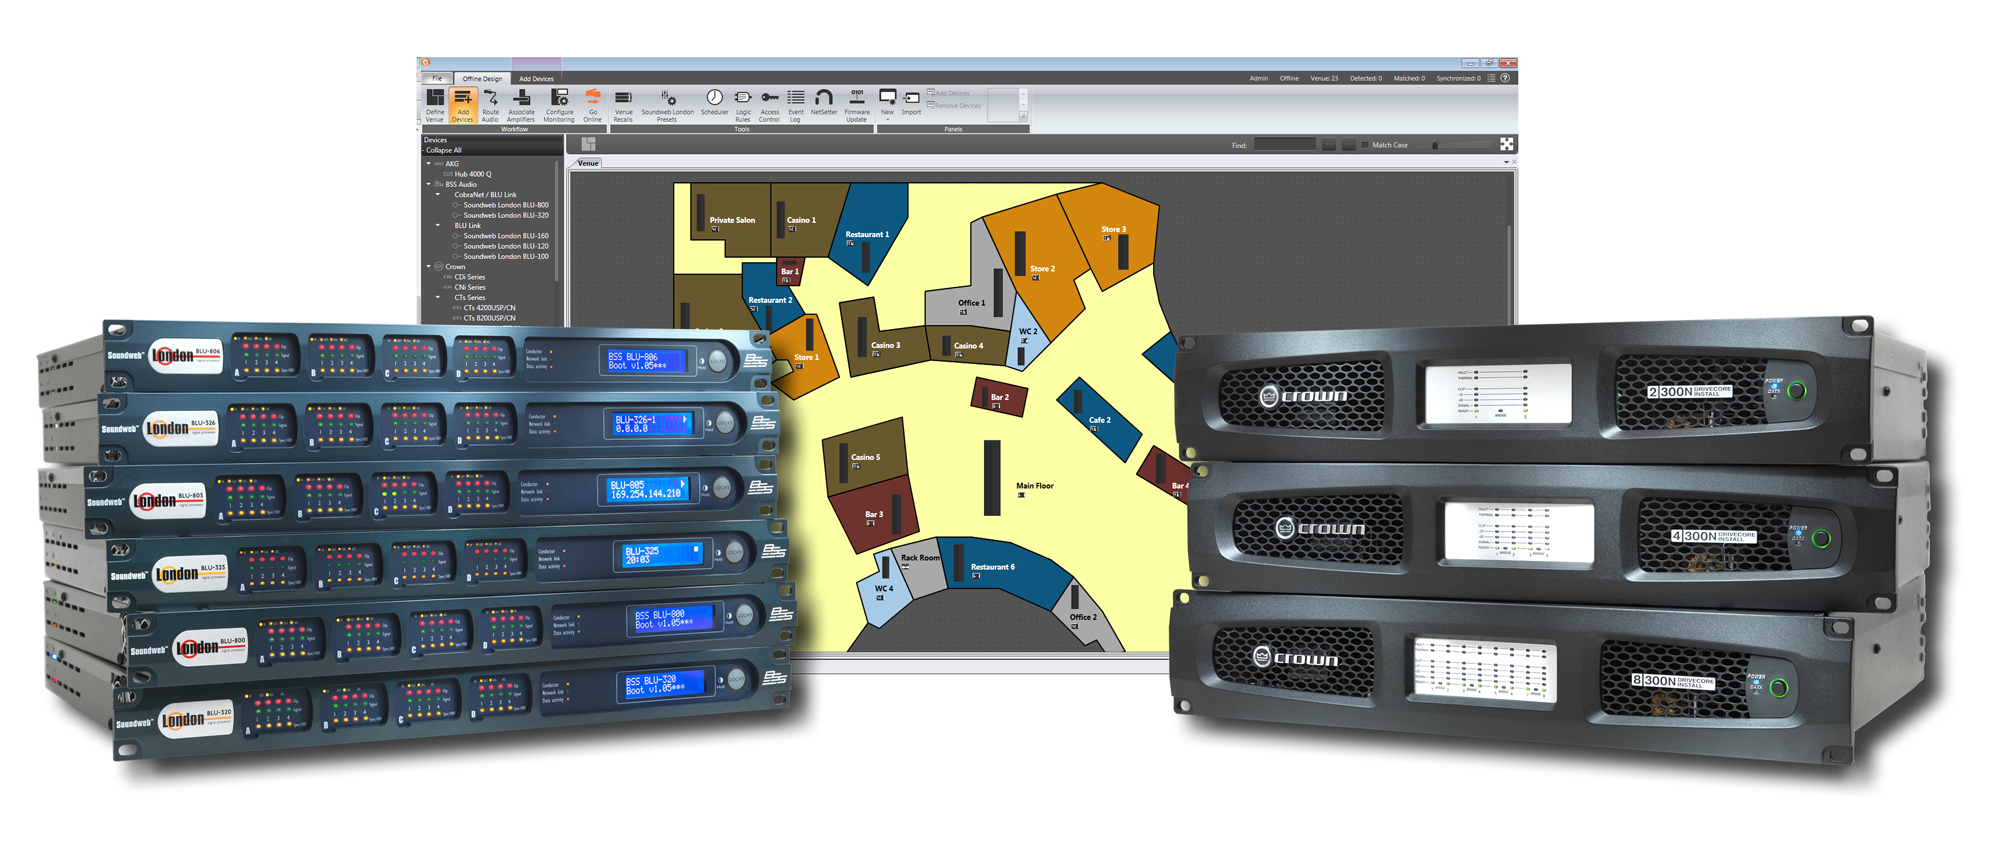 HARMAN Architectural Media Systems Debut At InfoComm 2013: Provides Consultants, Contractors, End-users With Superior Experience, Premium Sound, Global Support